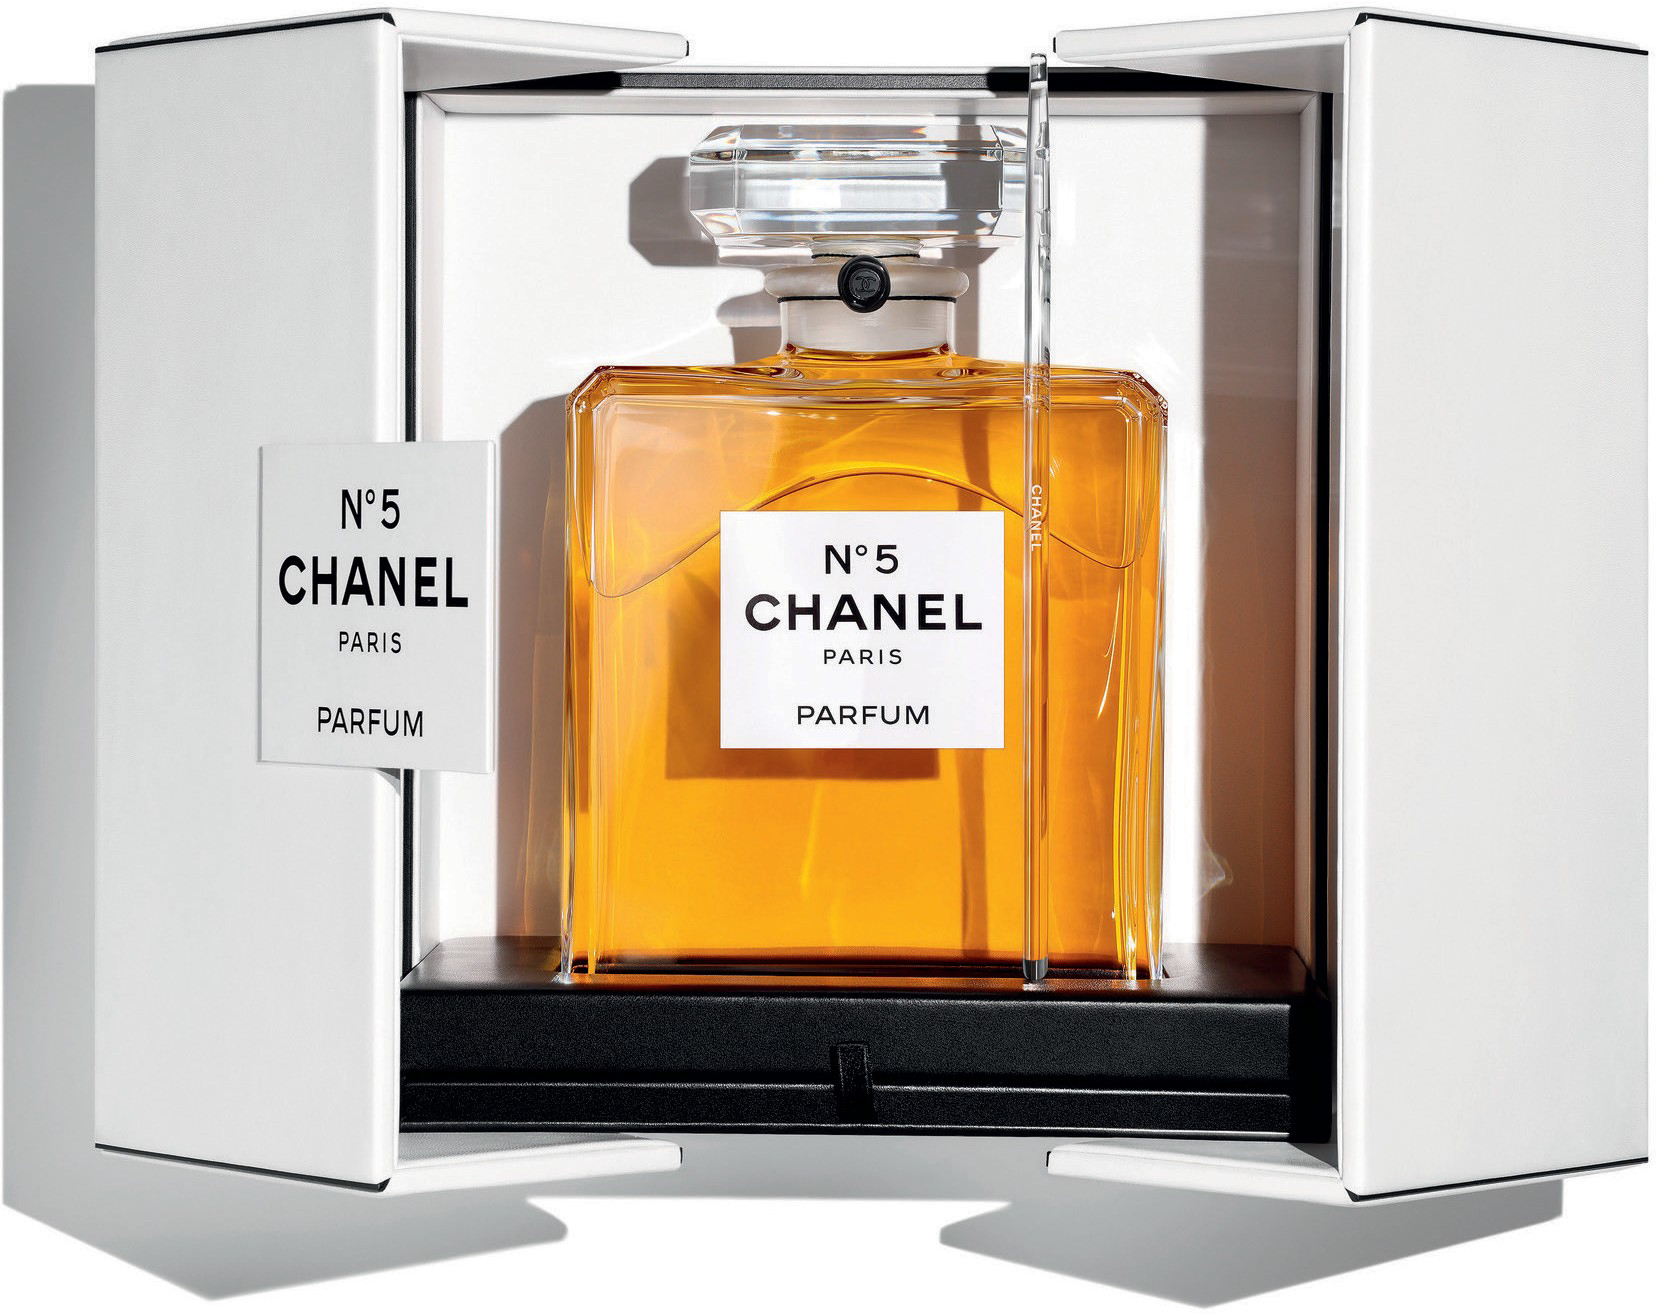 CHANEL N°5 COLLECTION HOLIDAY 2021 